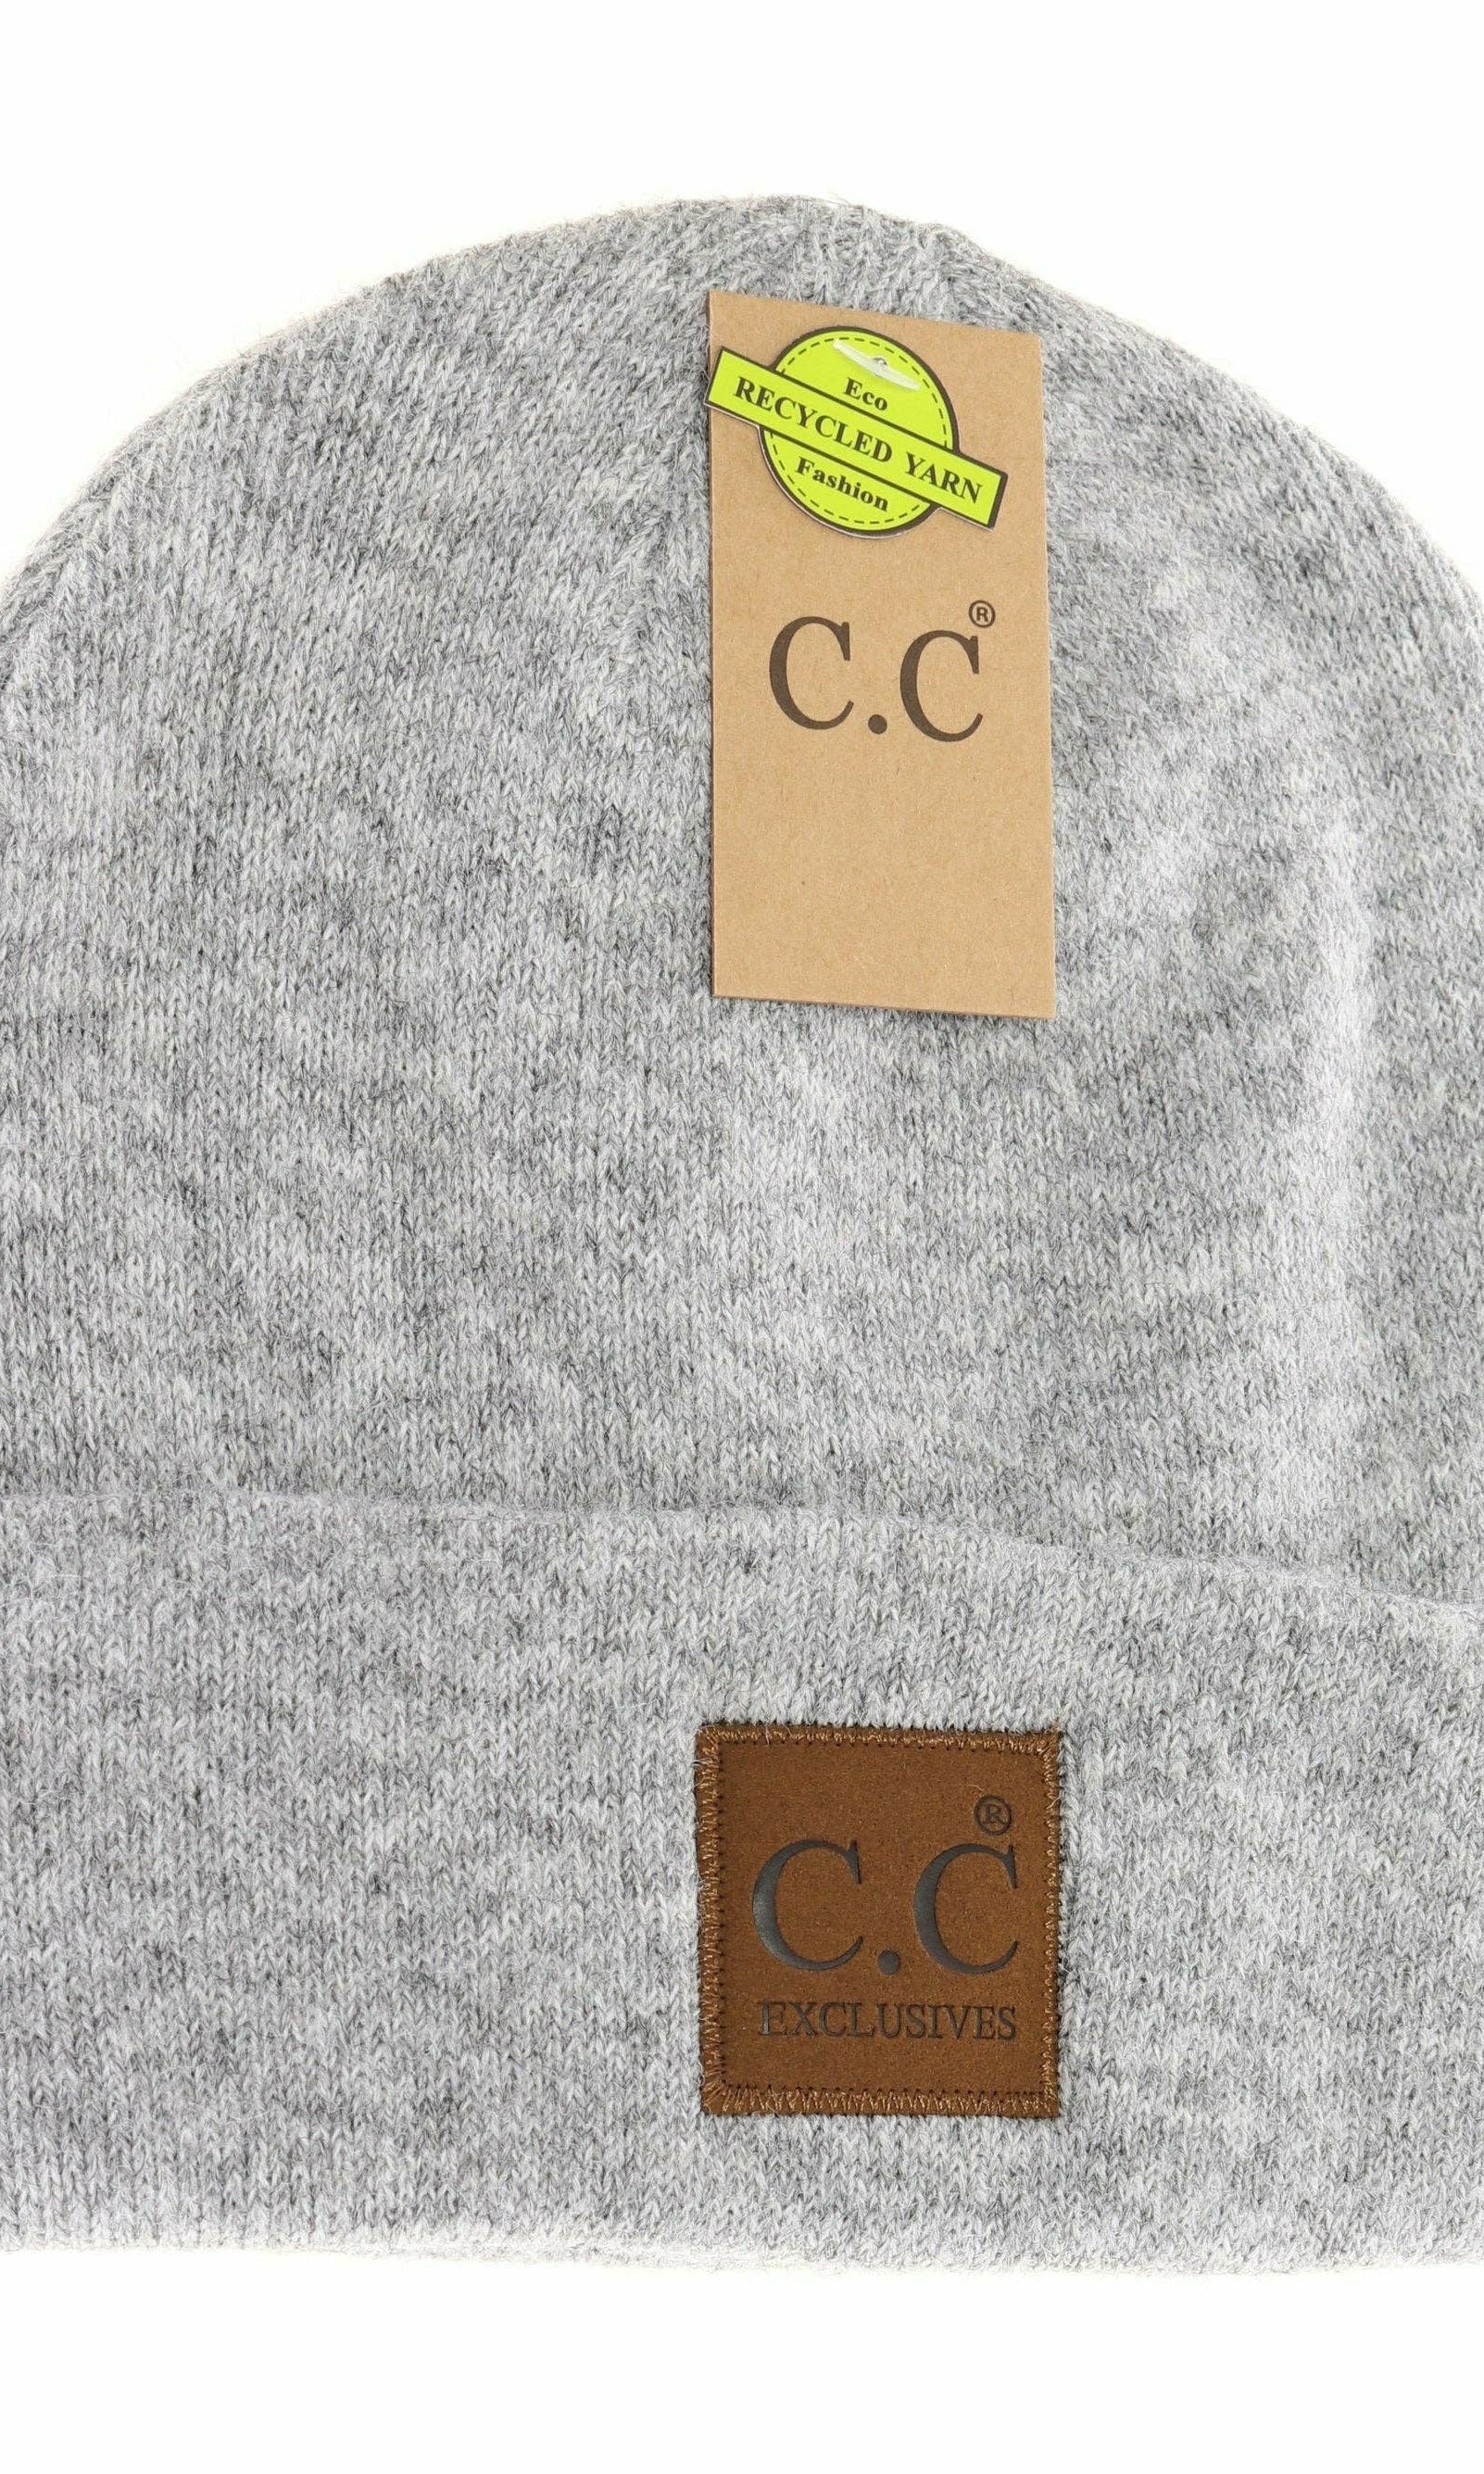 Unisex Soft Ribbed Leather Patch C.C. Beanie Heather Light Grey Heather Light Grey  beanie C.C Beanie- Tilden Co.